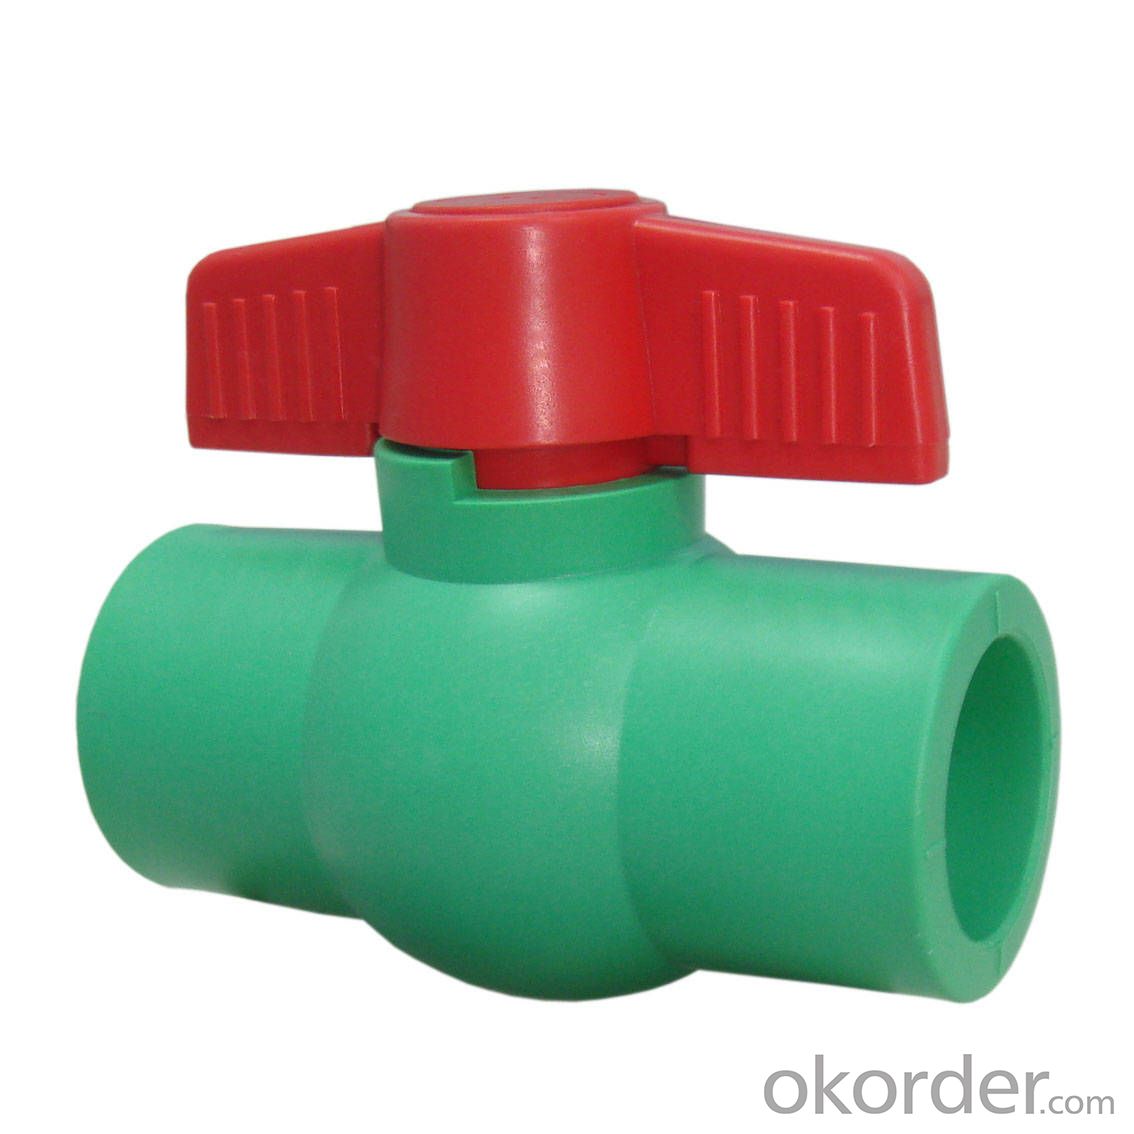 PVC Ball Valve for Landscape Irrigation Application from China Professional